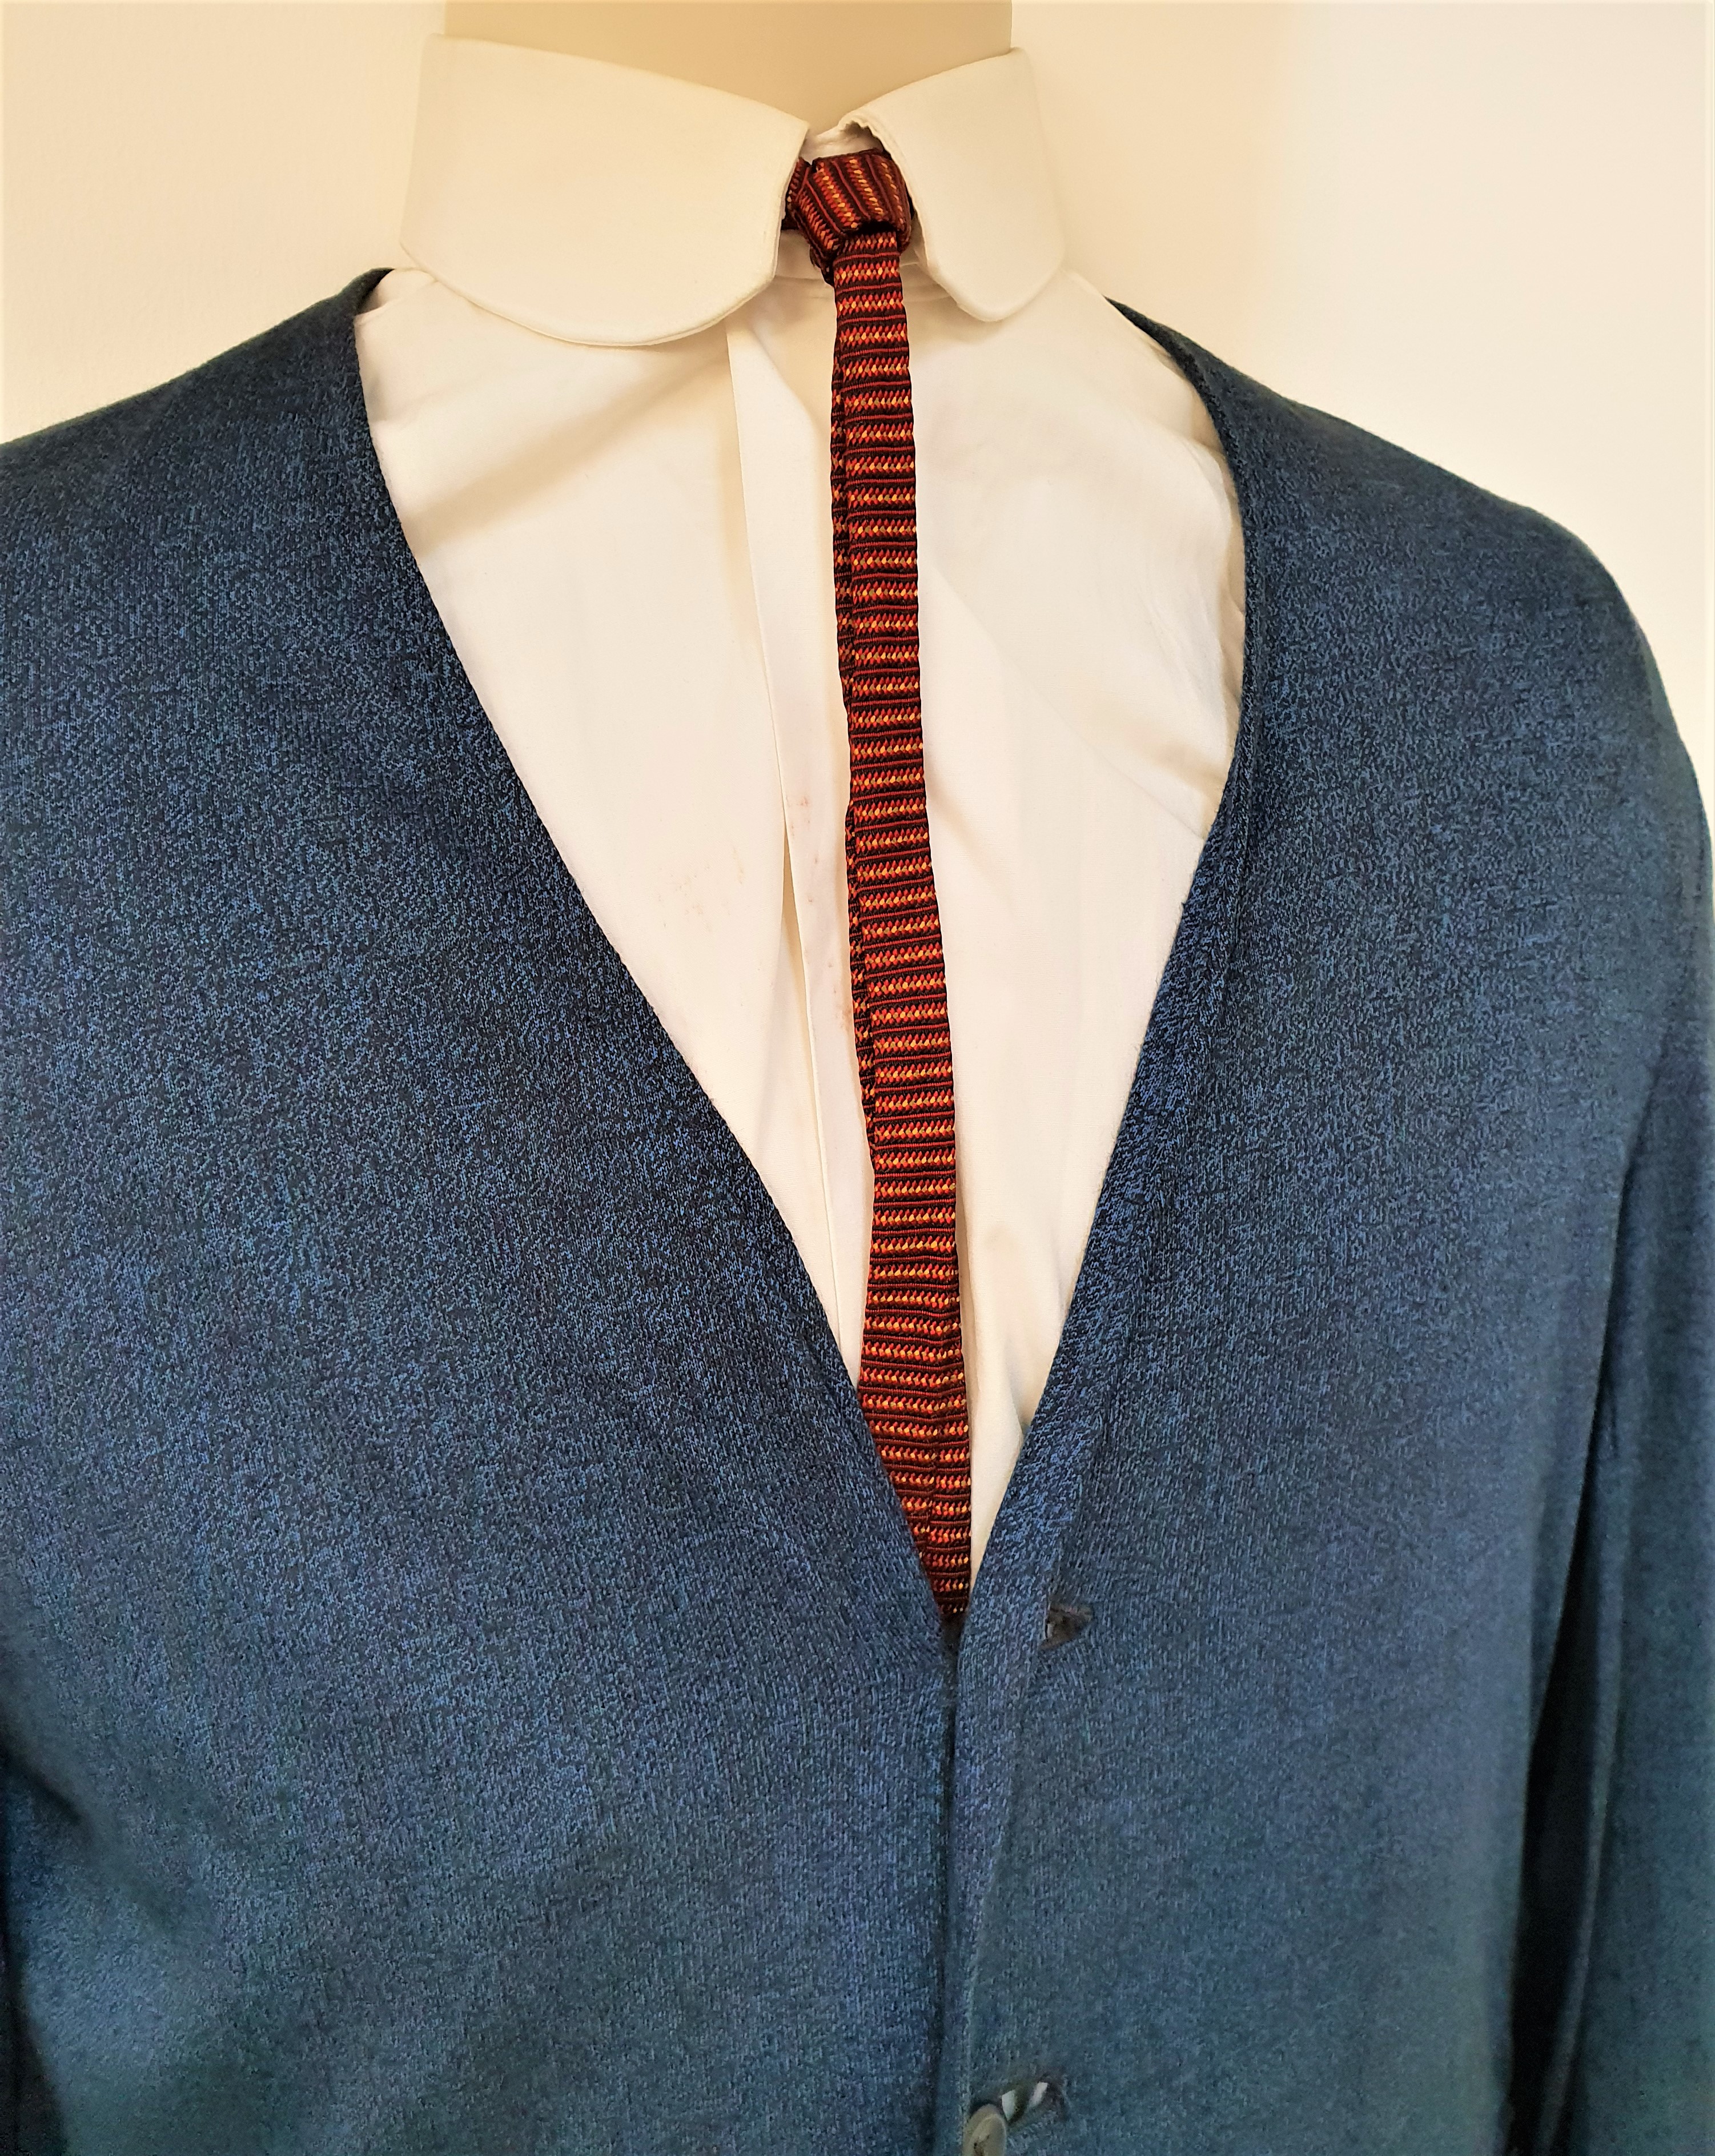 THE BEATLES - RINGO STARR'S SUIT, SHIRT AND TIE the collarless four button jacket in blue jersey - Image 3 of 8